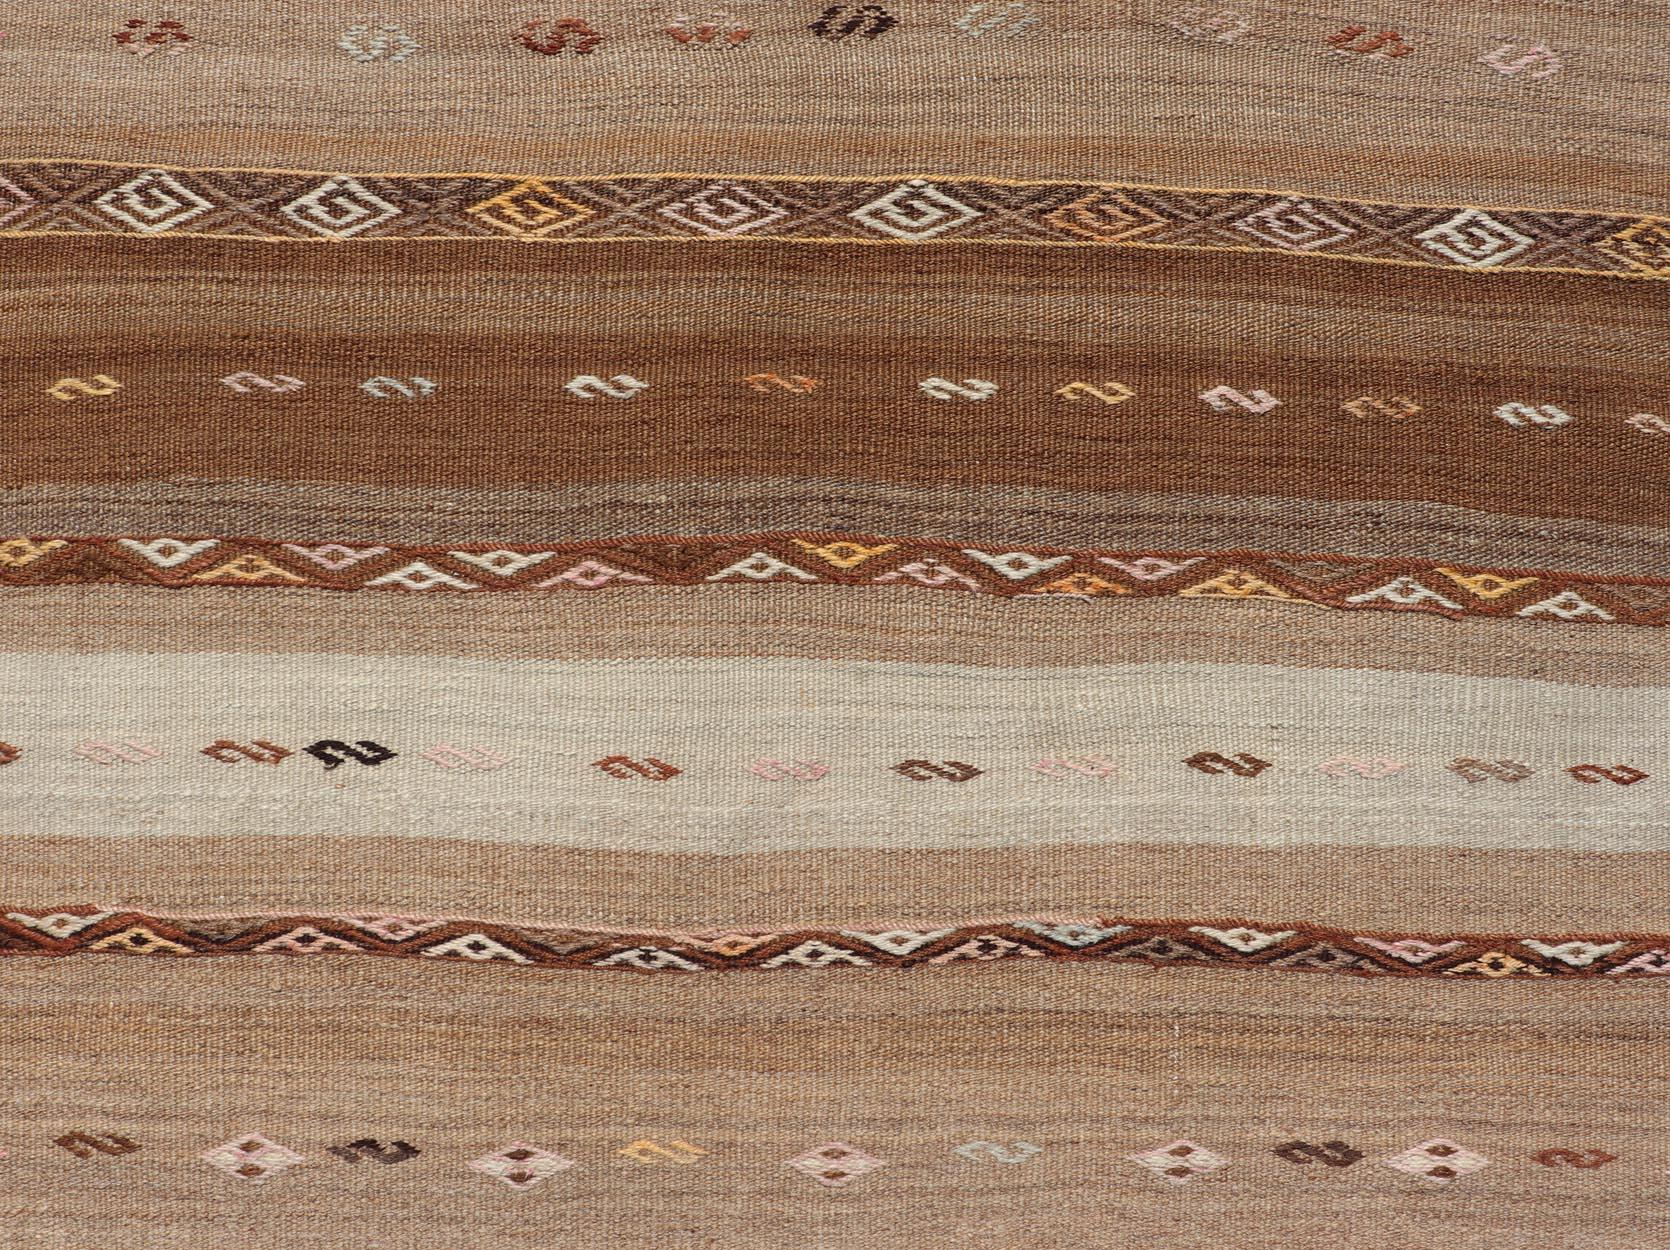 Vintage Earthy Kilim Gallery Runner with Stripe Design in Multi Colors & Motif's For Sale 5